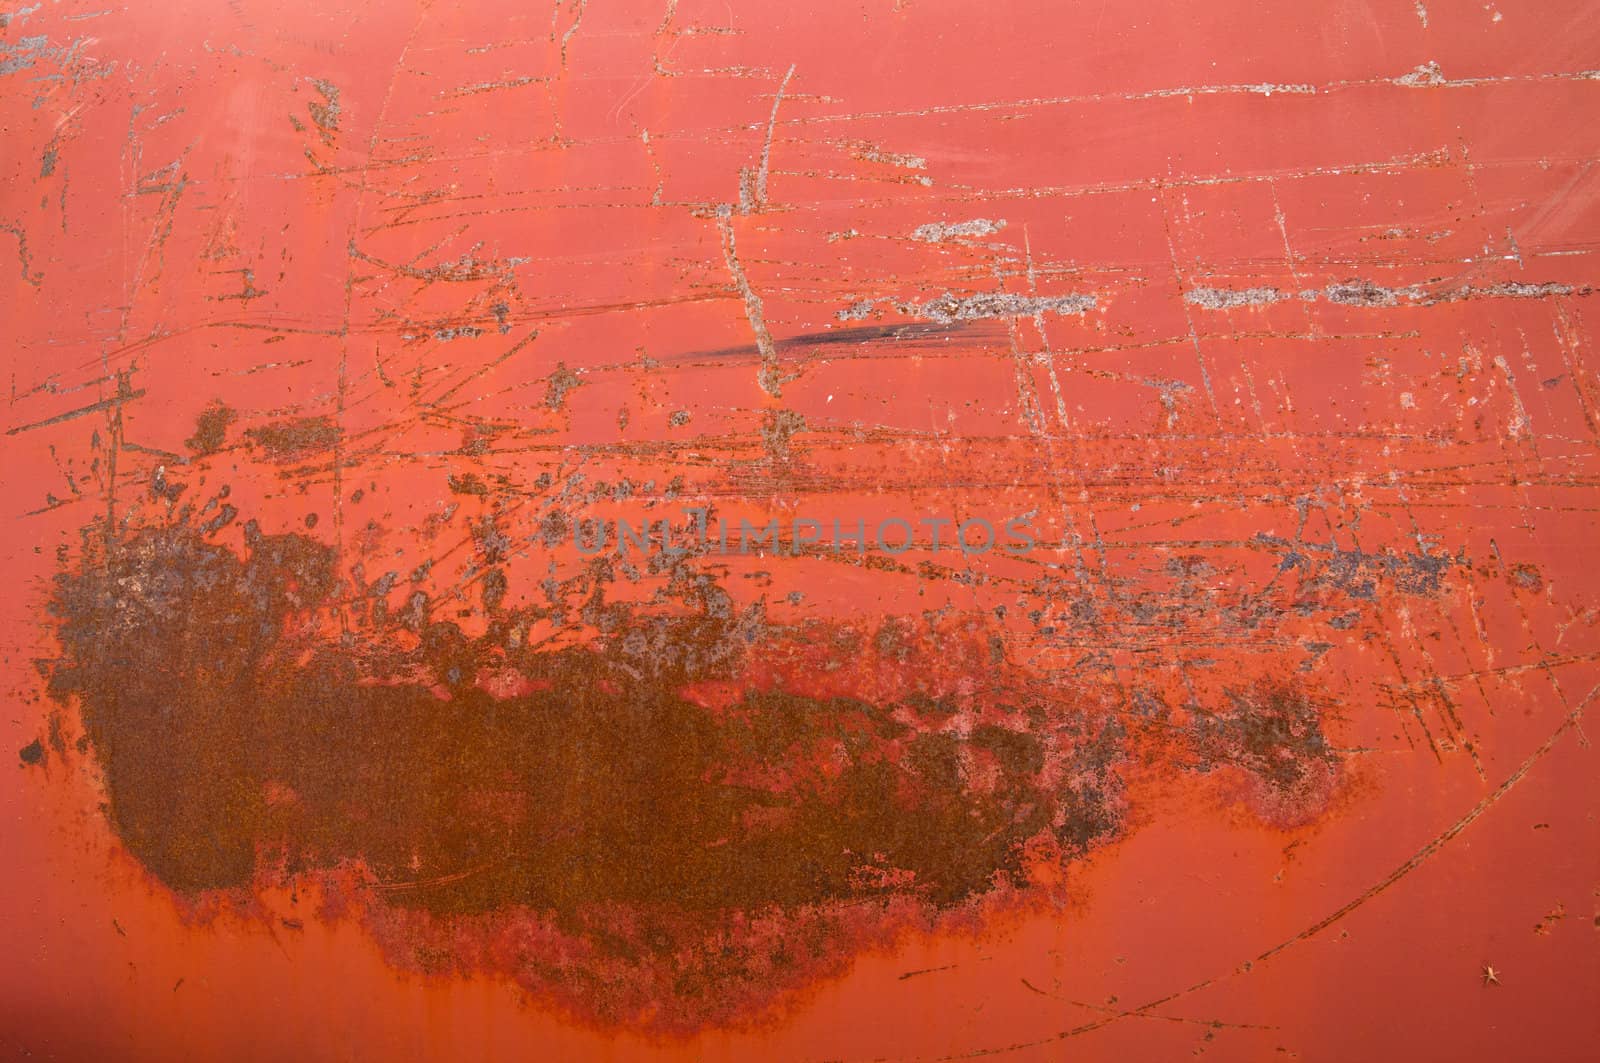 Rusty red metal tank texture and details